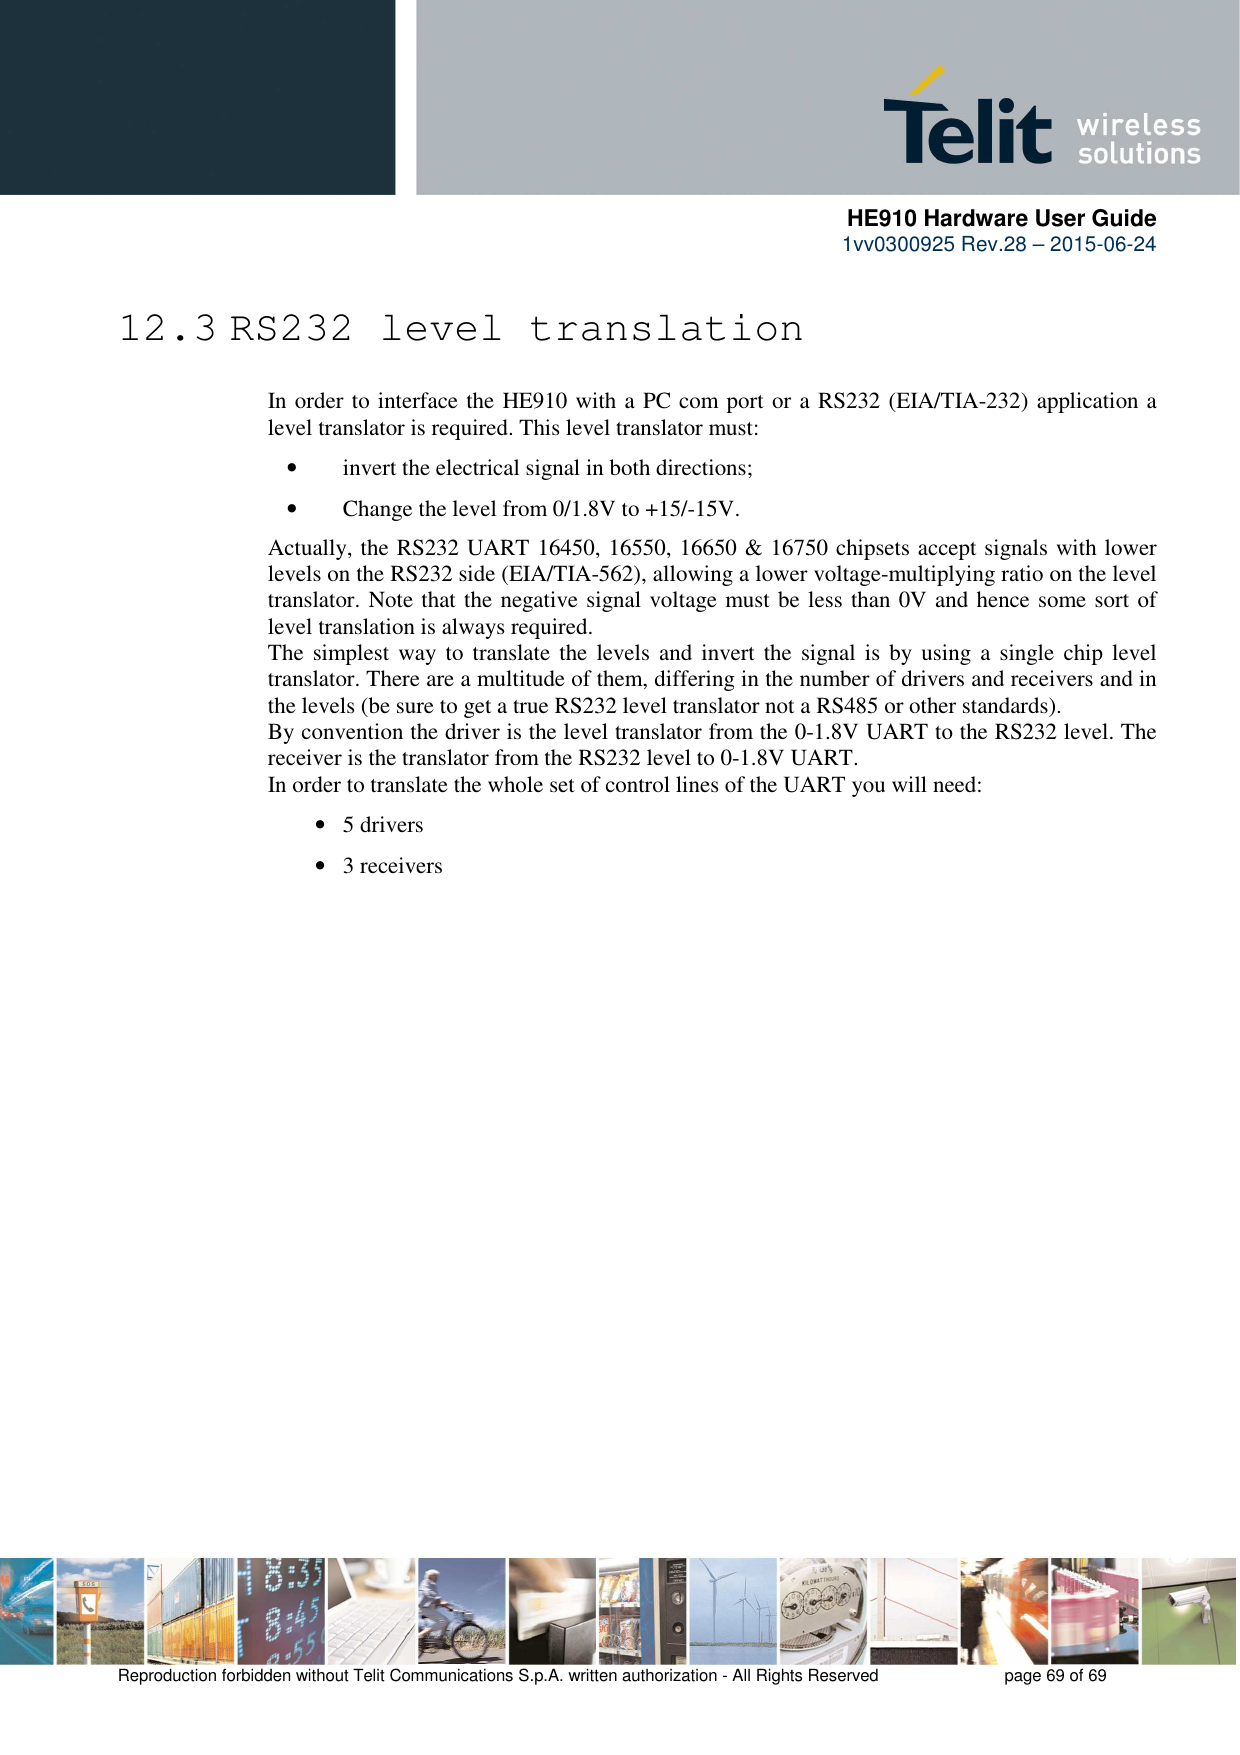      HE910 Hardware User Guide 1vv0300925 Rev.28 – 2015-06-24    Reproduction forbidden without Telit Communications S.p.A. written authorization - All Rights Reserved    page 69 of 69  12.3 RS232 level translation In order to interface the HE910 with a PC com port or a RS232 (EIA/TIA-232) application a level translator is required. This level translator must: • invert the electrical signal in both directions; • Change the level from 0/1.8V to +15/-15V. Actually, the RS232 UART 16450, 16550, 16650 &amp; 16750 chipsets accept signals with lower levels on the RS232 side (EIA/TIA-562), allowing a lower voltage-multiplying ratio on the level translator. Note that the negative signal voltage must be less than 0V and hence some sort of level translation is always required.  The  simplest way to  translate  the  levels and invert the signal is by  using  a single chip level translator. There are a multitude of them, differing in the number of drivers and receivers and in the levels (be sure to get a true RS232 level translator not a RS485 or other standards). By convention the driver is the level translator from the 0-1.8V UART to the RS232 level. The receiver is the translator from the RS232 level to 0-1.8V UART. In order to translate the whole set of control lines of the UART you will need: • 5 drivers • 3 receivers 